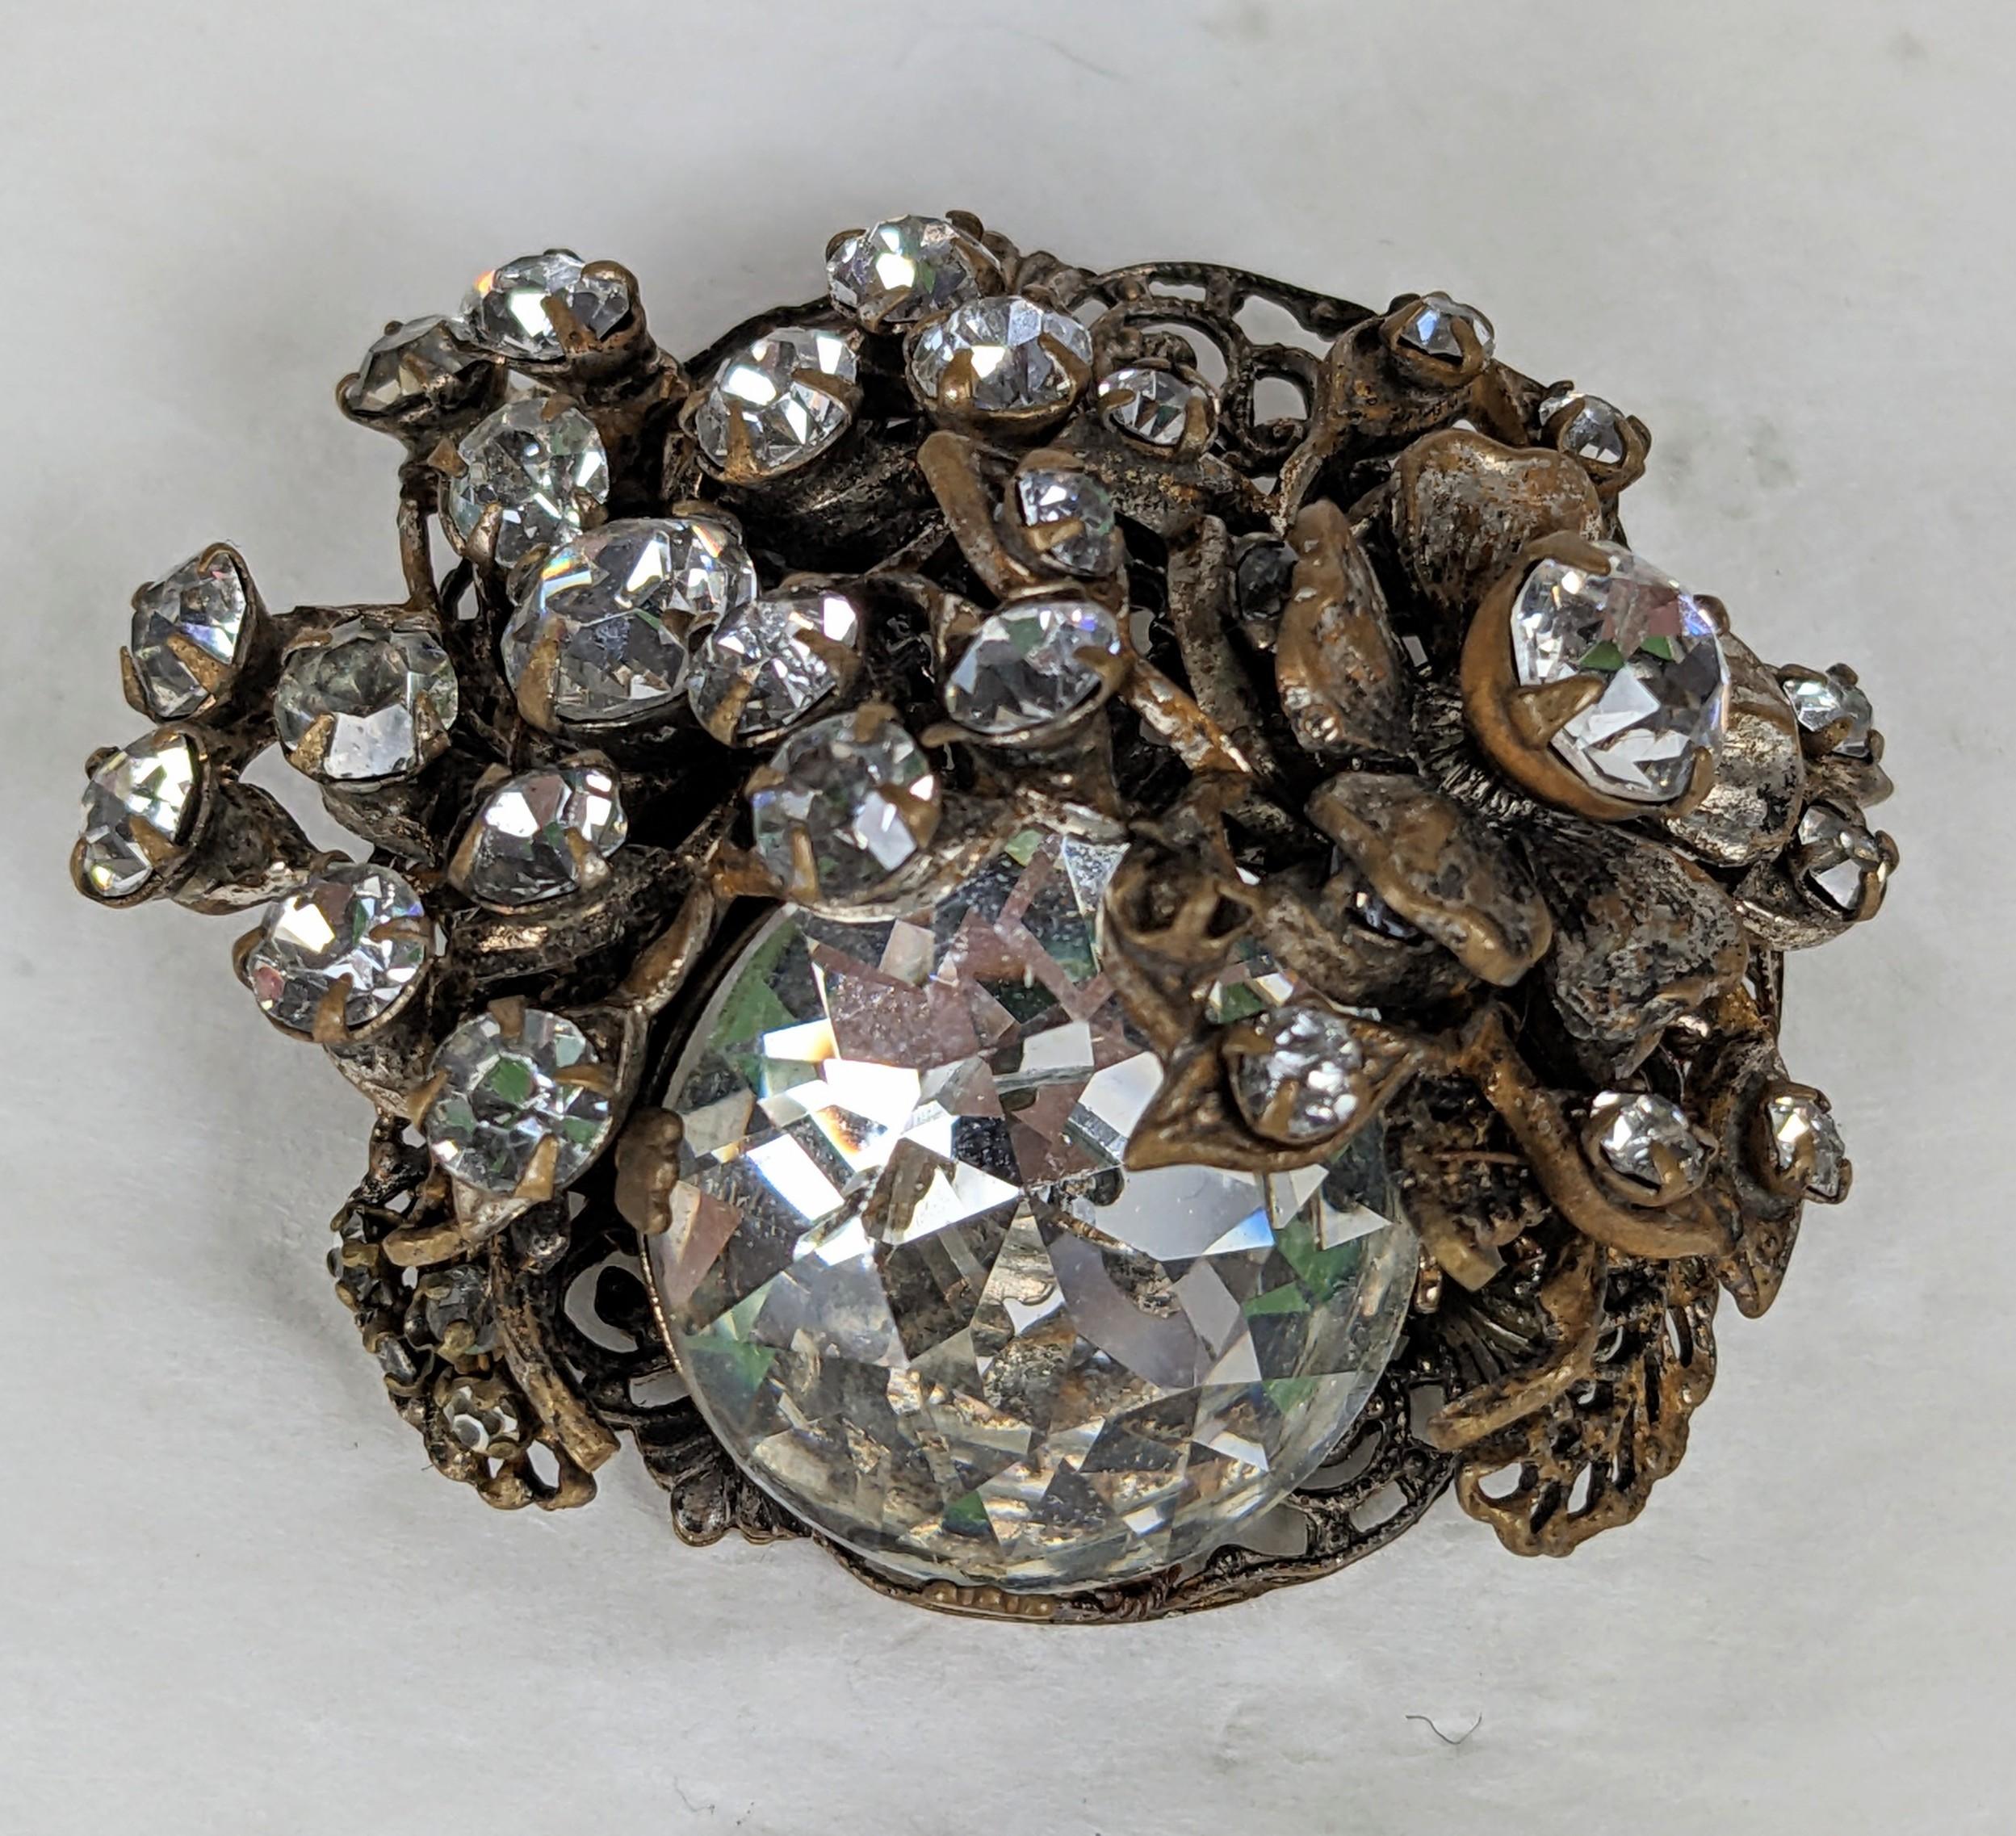 Charming Miriam Haskell Crystal Floral Brooch from the 1950's. Massive Swarovski crystal surrounded by elaborate floral brass filigrees set with a myriad of pastes. 2